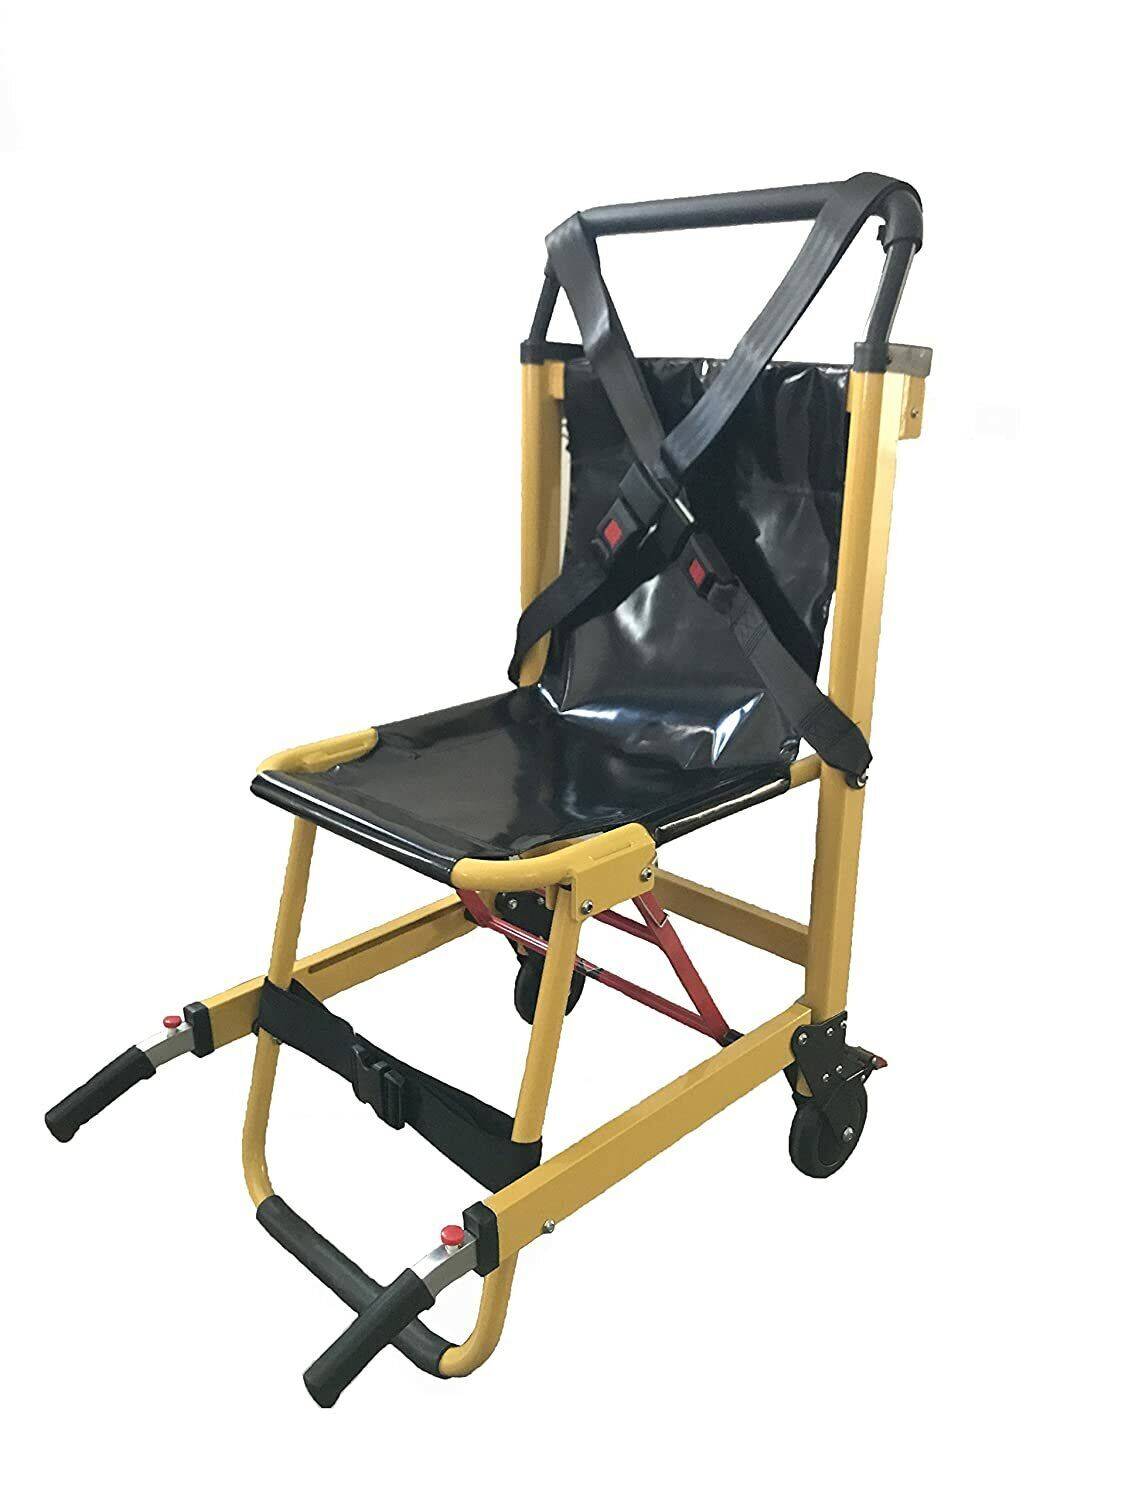 LINE2design EMS Stair Chair Medical Emergency Patient Transfer - Used